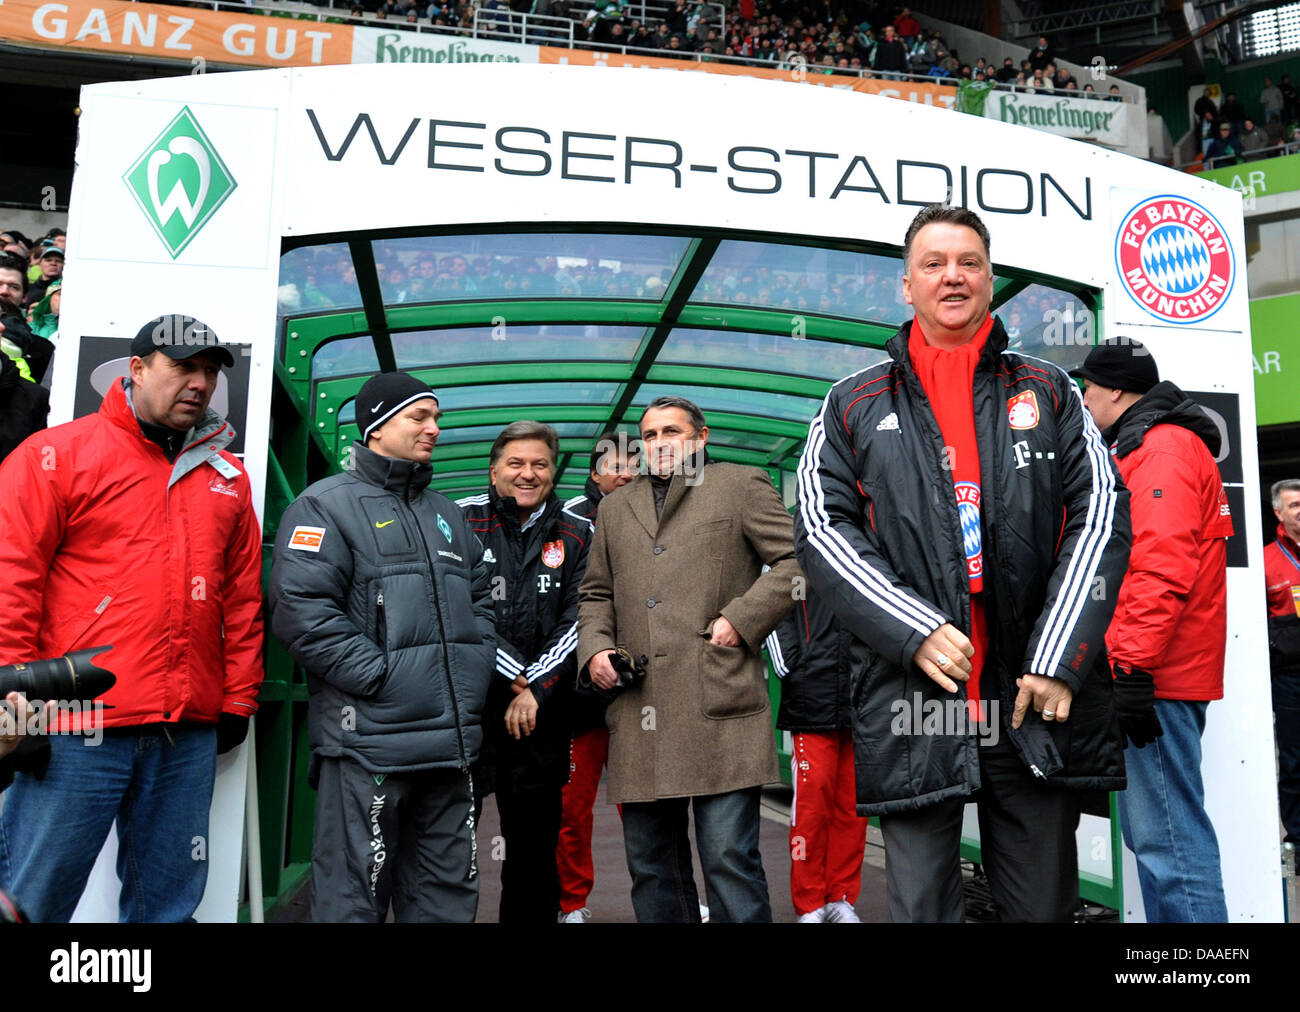 Bayern Munich's head coach Louis van Gaal (R) and Werder Bremen's managing director Klaus Allofs (2nd from R, back) arrives at the stadium prior to the Bundesliga soccer match between Werder Bremen and Bayern Munich in the Weser Stadion in Bremen, Germany, 29 January 2011. Photo: Carmen Jaspersen Stock Photo